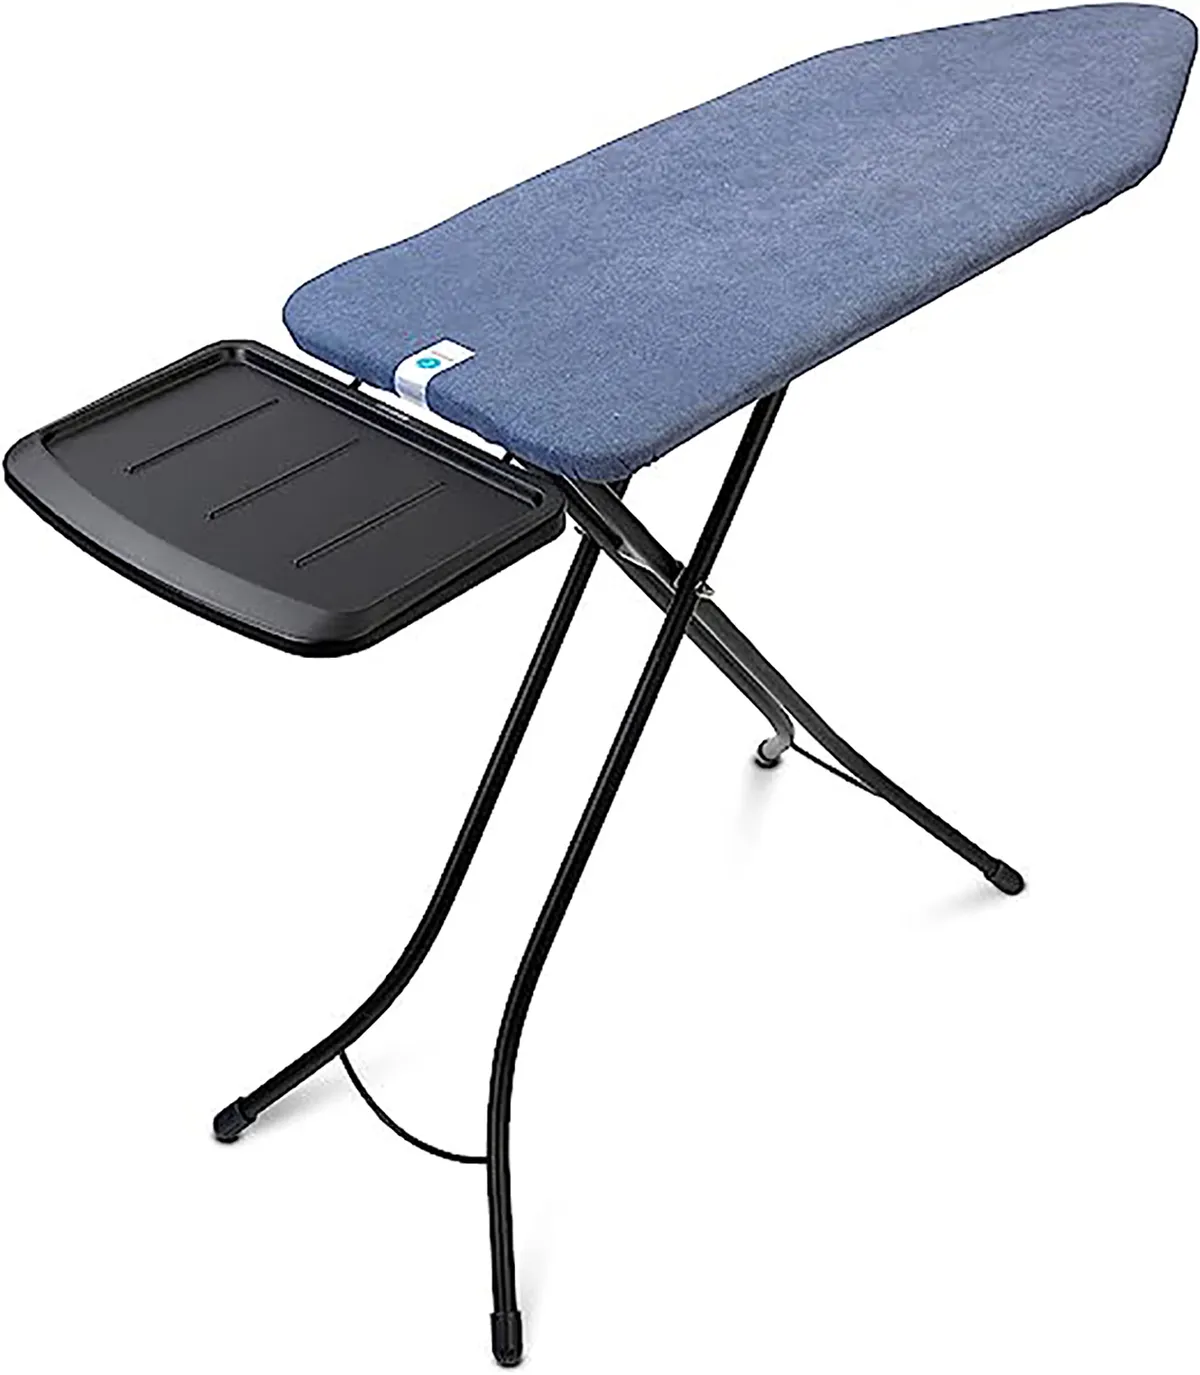 Best ironing boards - tested by Which? - Which?